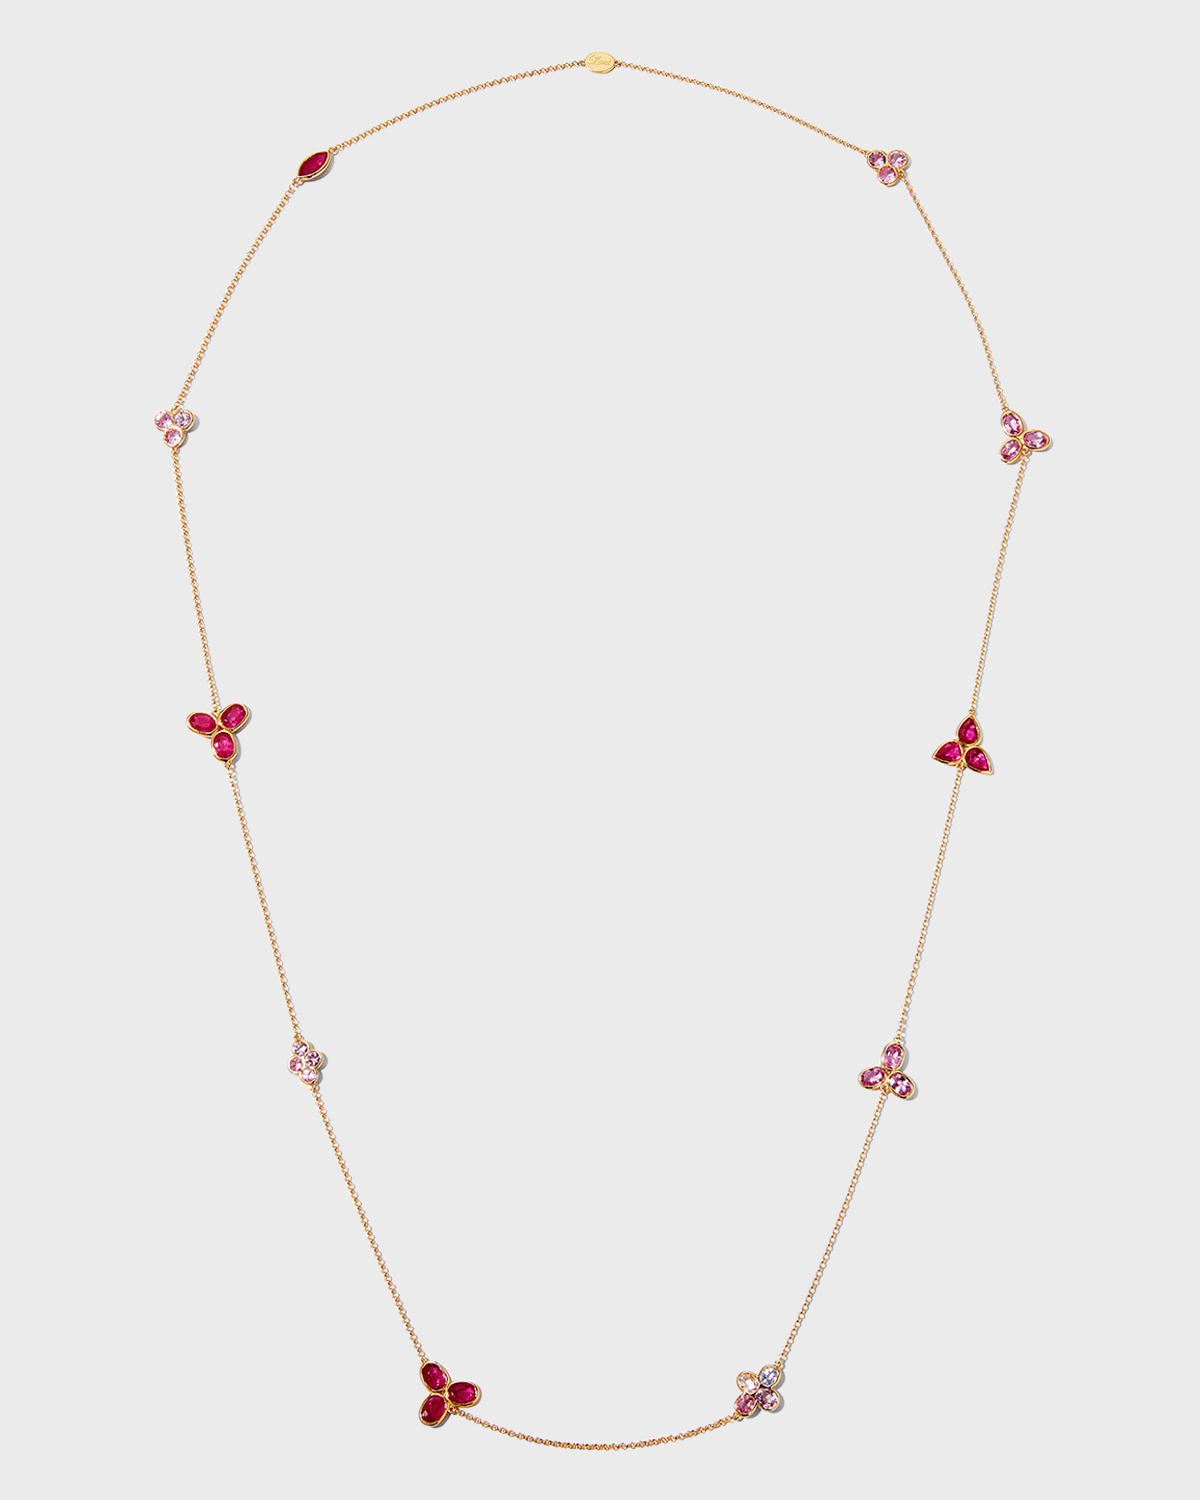 Alexander Laut Yellow Gold Sapphire, Ruby and Diamond Necklace